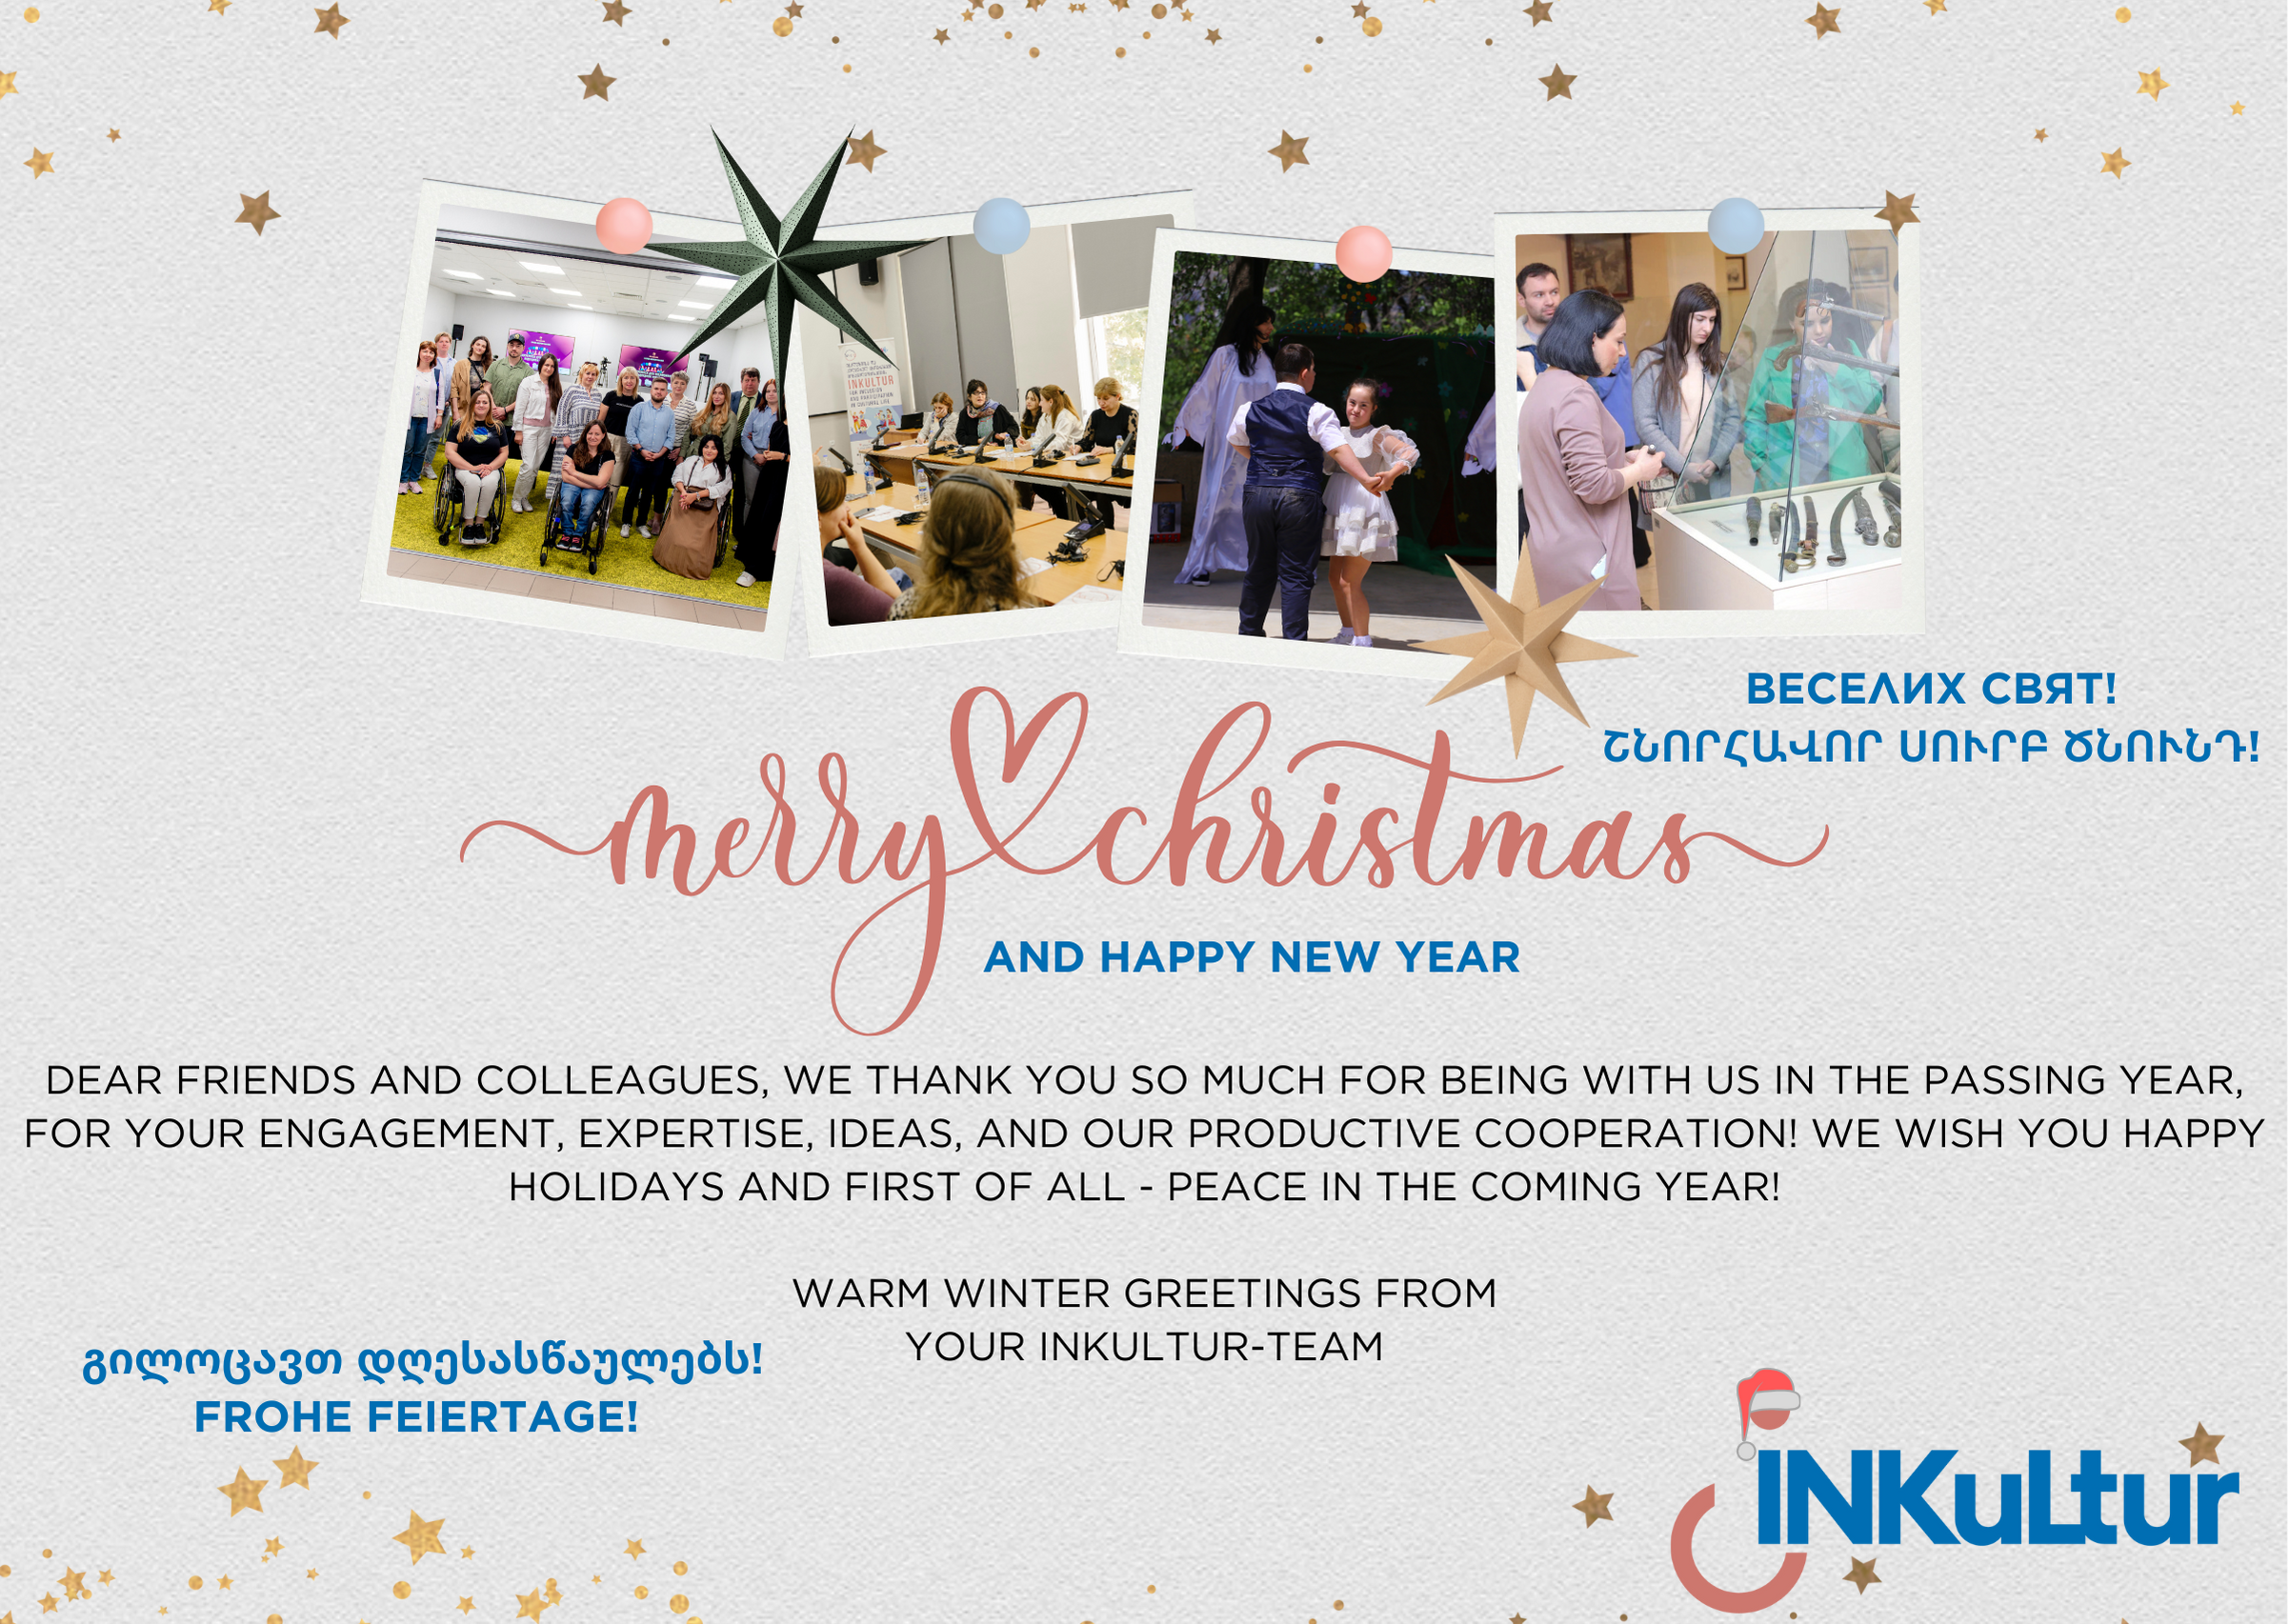 INKuLtur-Team Extends Warm Holiday Greetings!